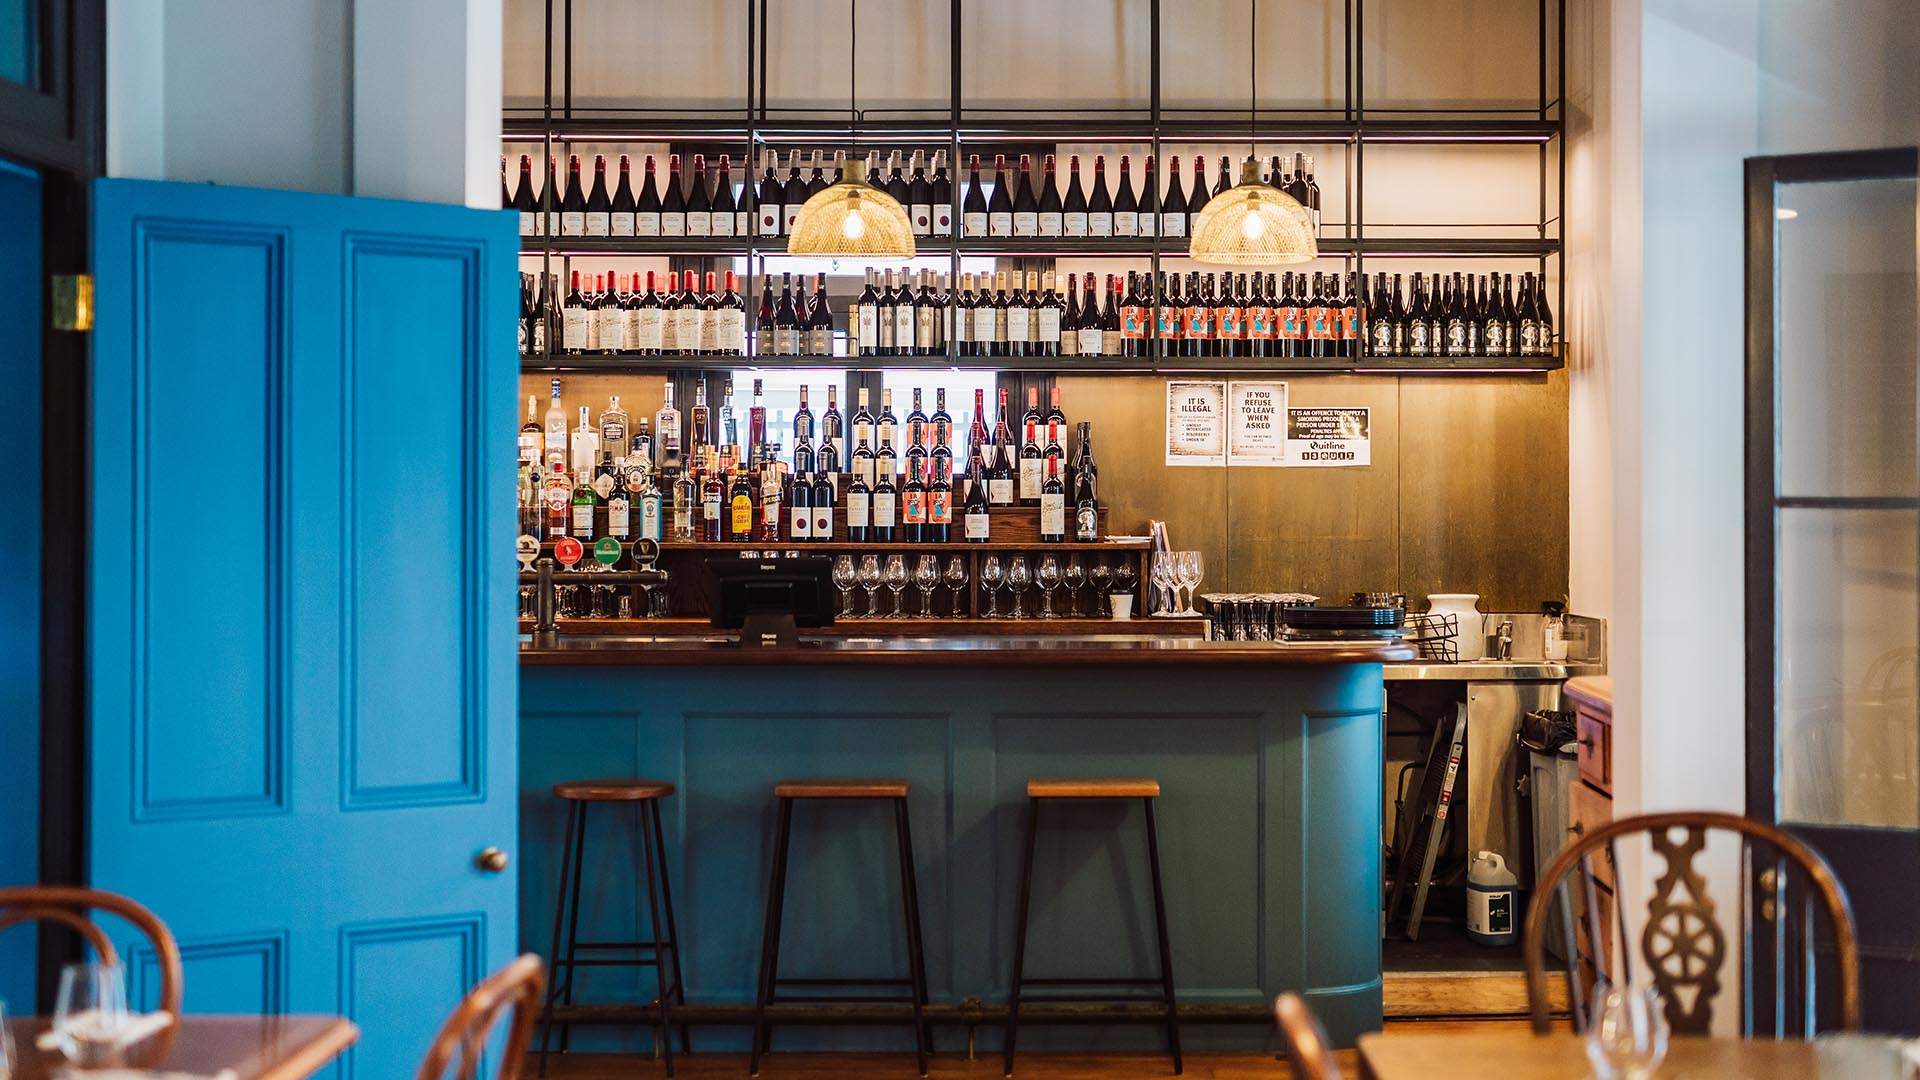 Now Open: The Rose & Crown Is South Bank's New London-Inspired Pub That's Taken Over Little Big House's Old Digs